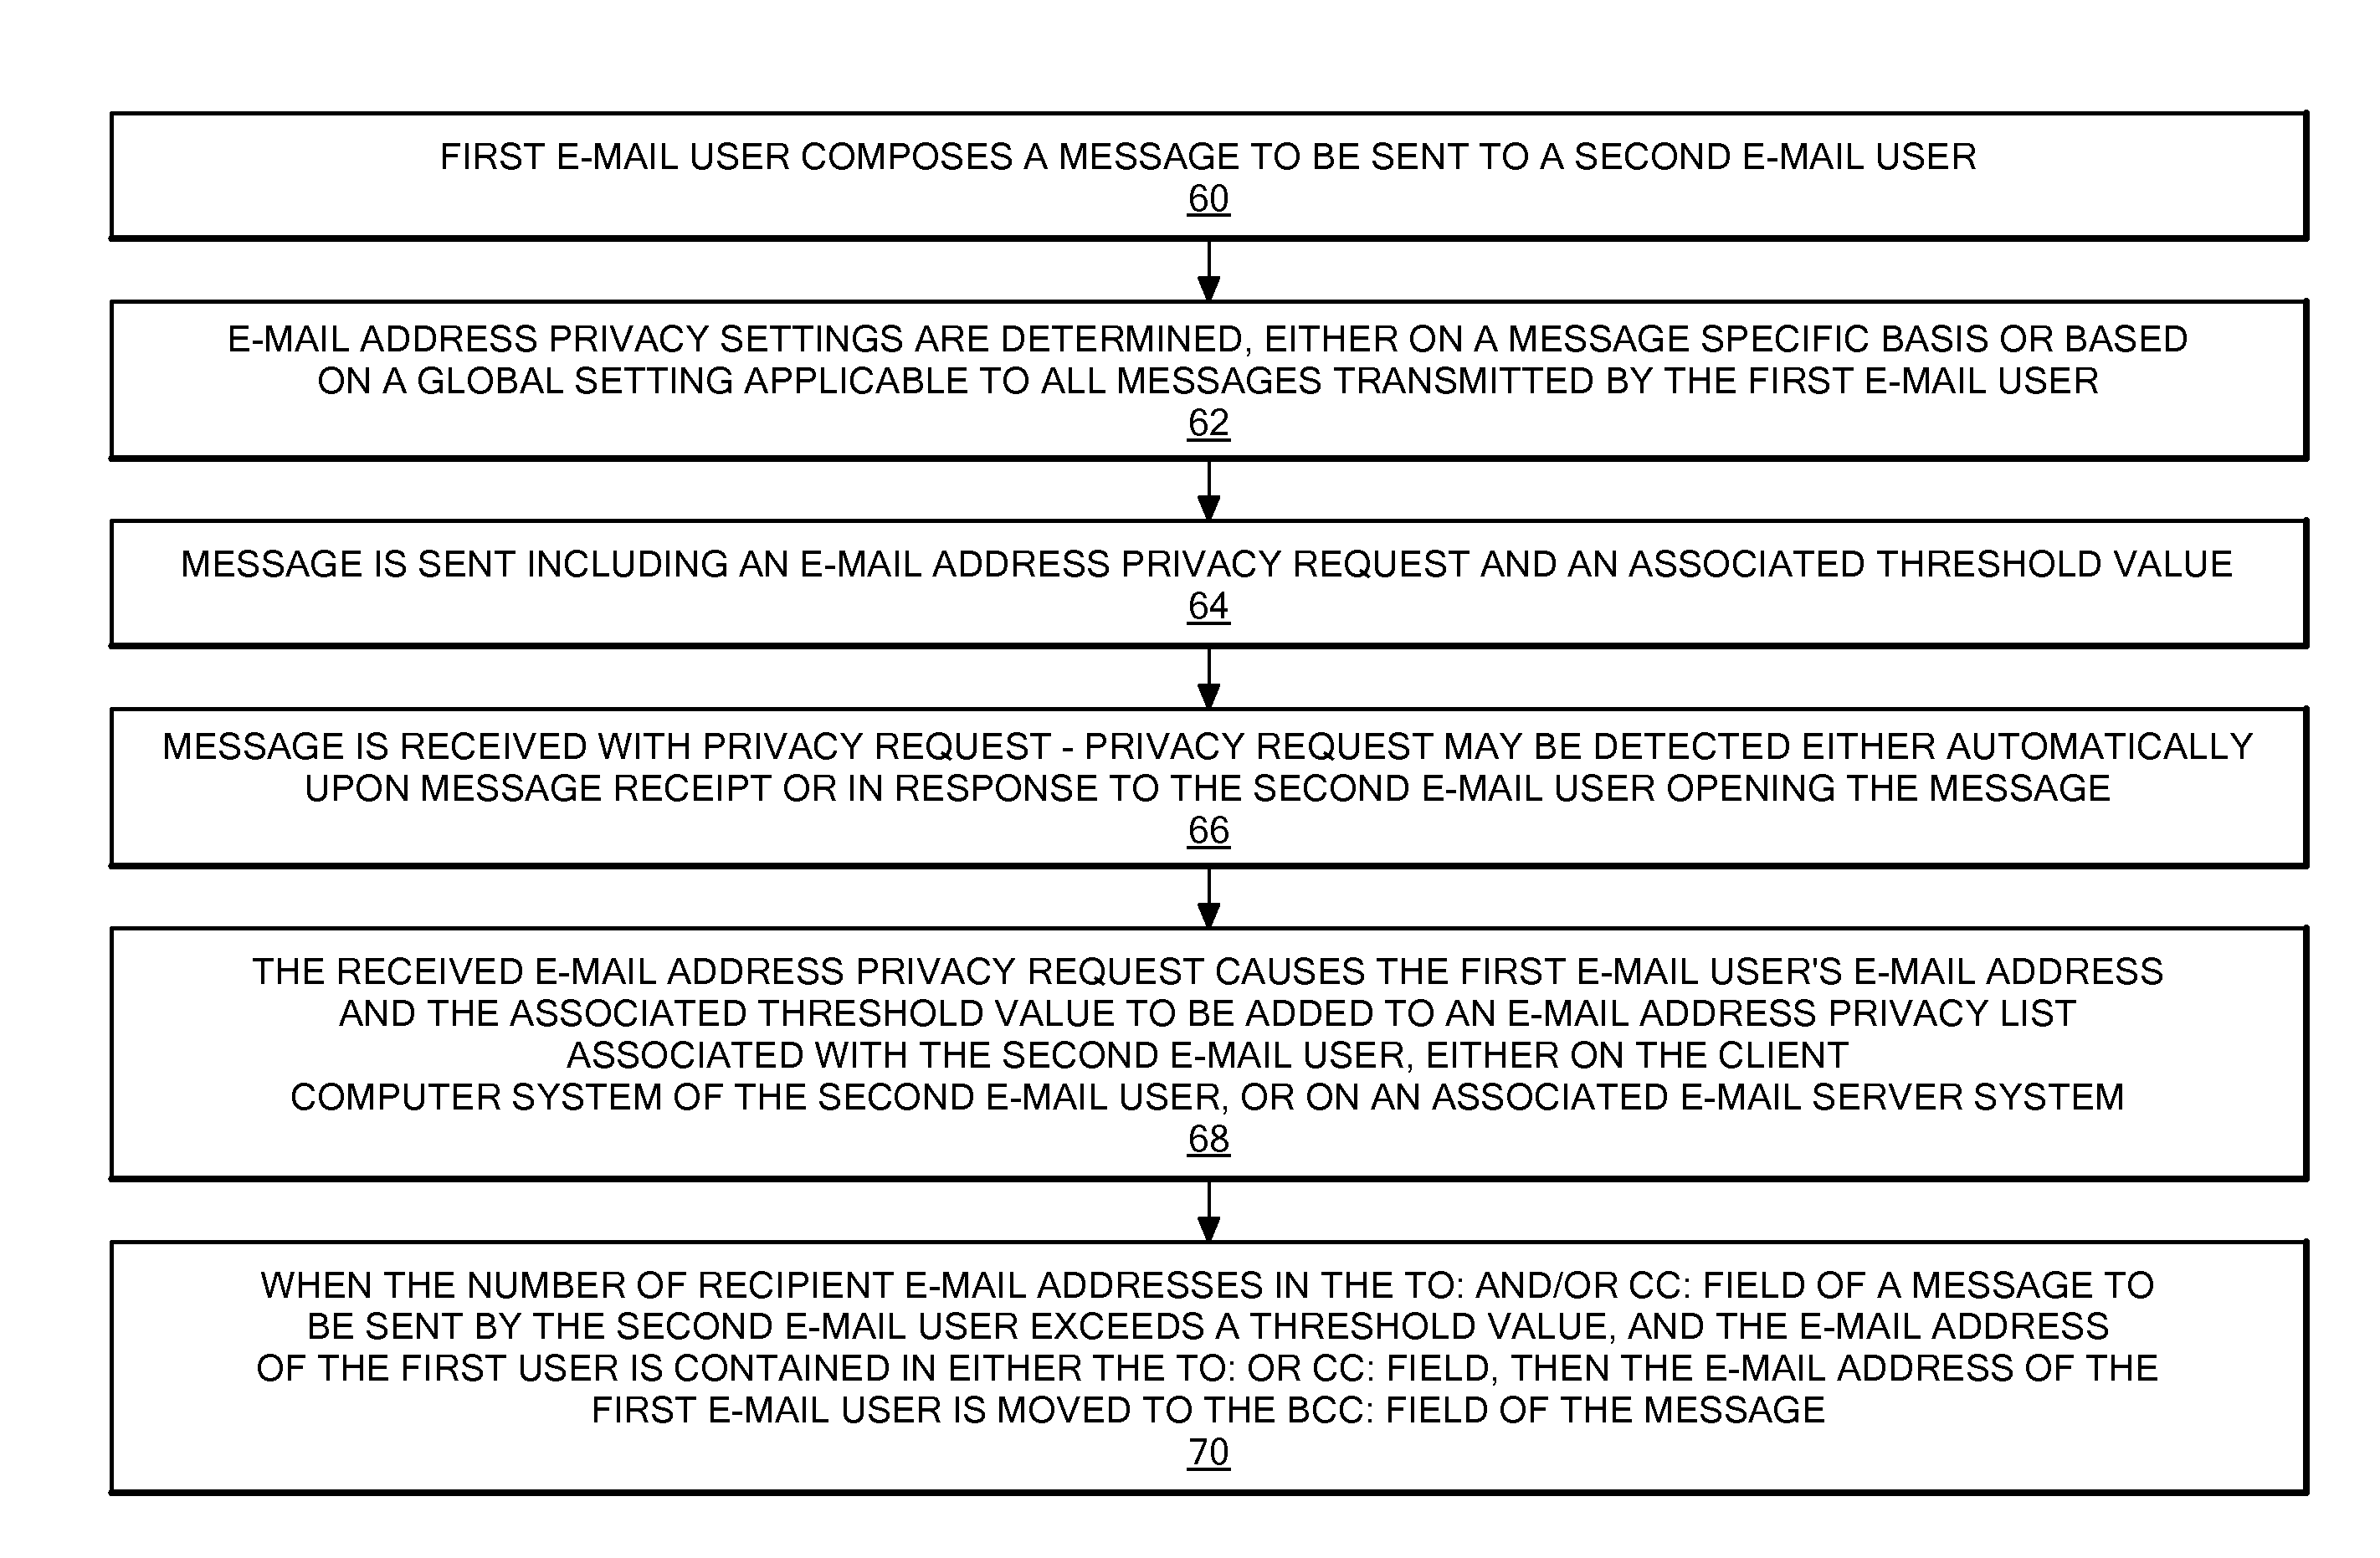 Method and system for forcing e-mail addresses into blind carbon copy ("bcc") to enforce privacy